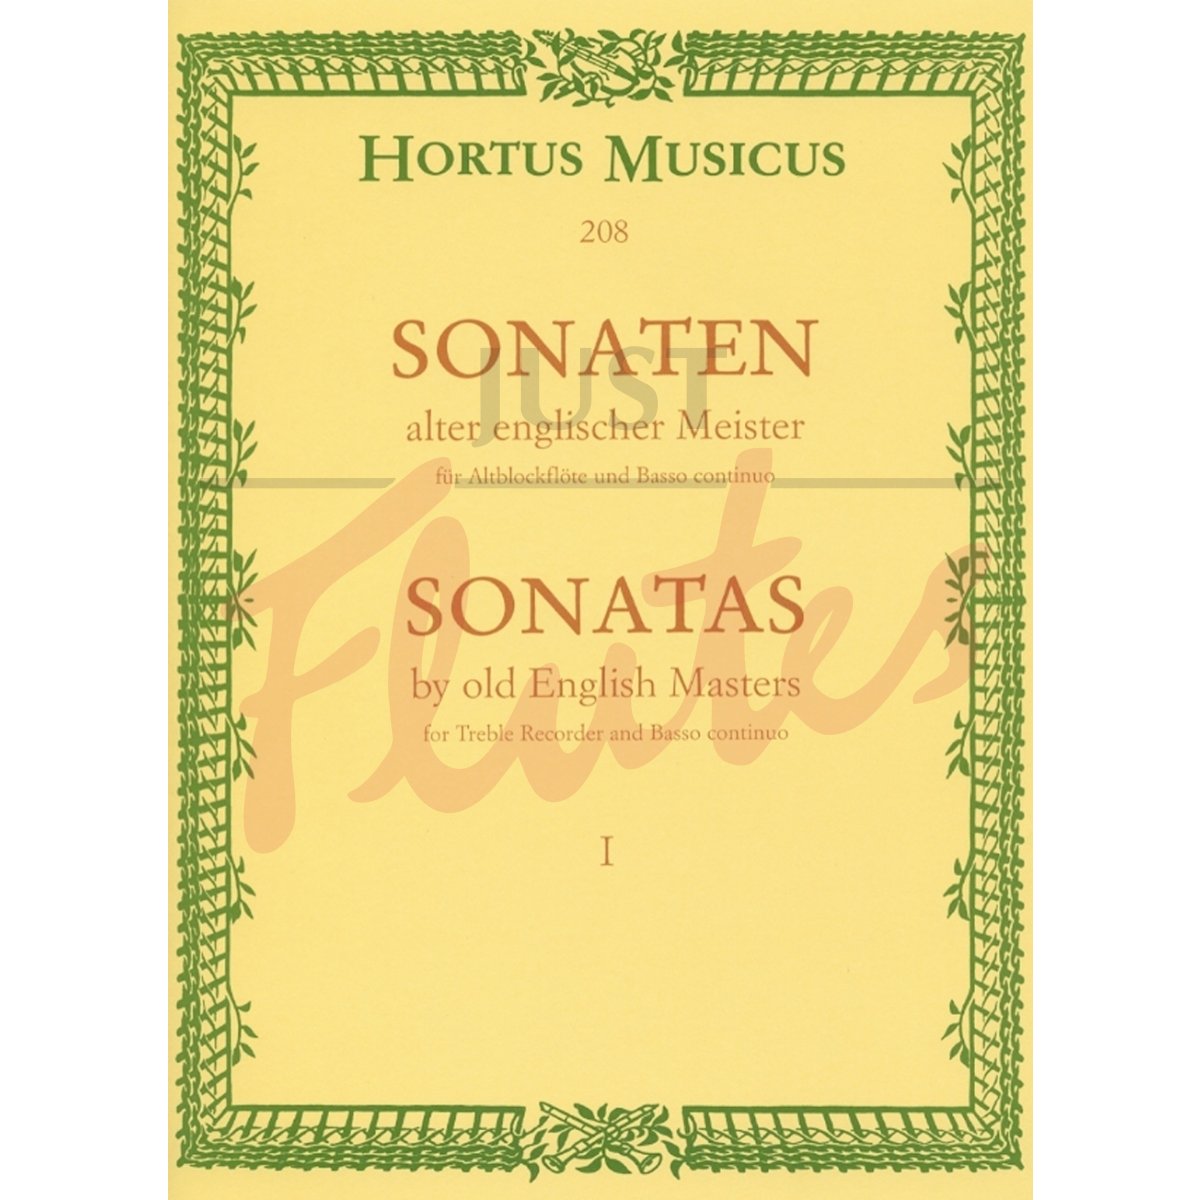 Sonatas by Old English Masters Vol 1 For Treble Recorder and Basso Continuo